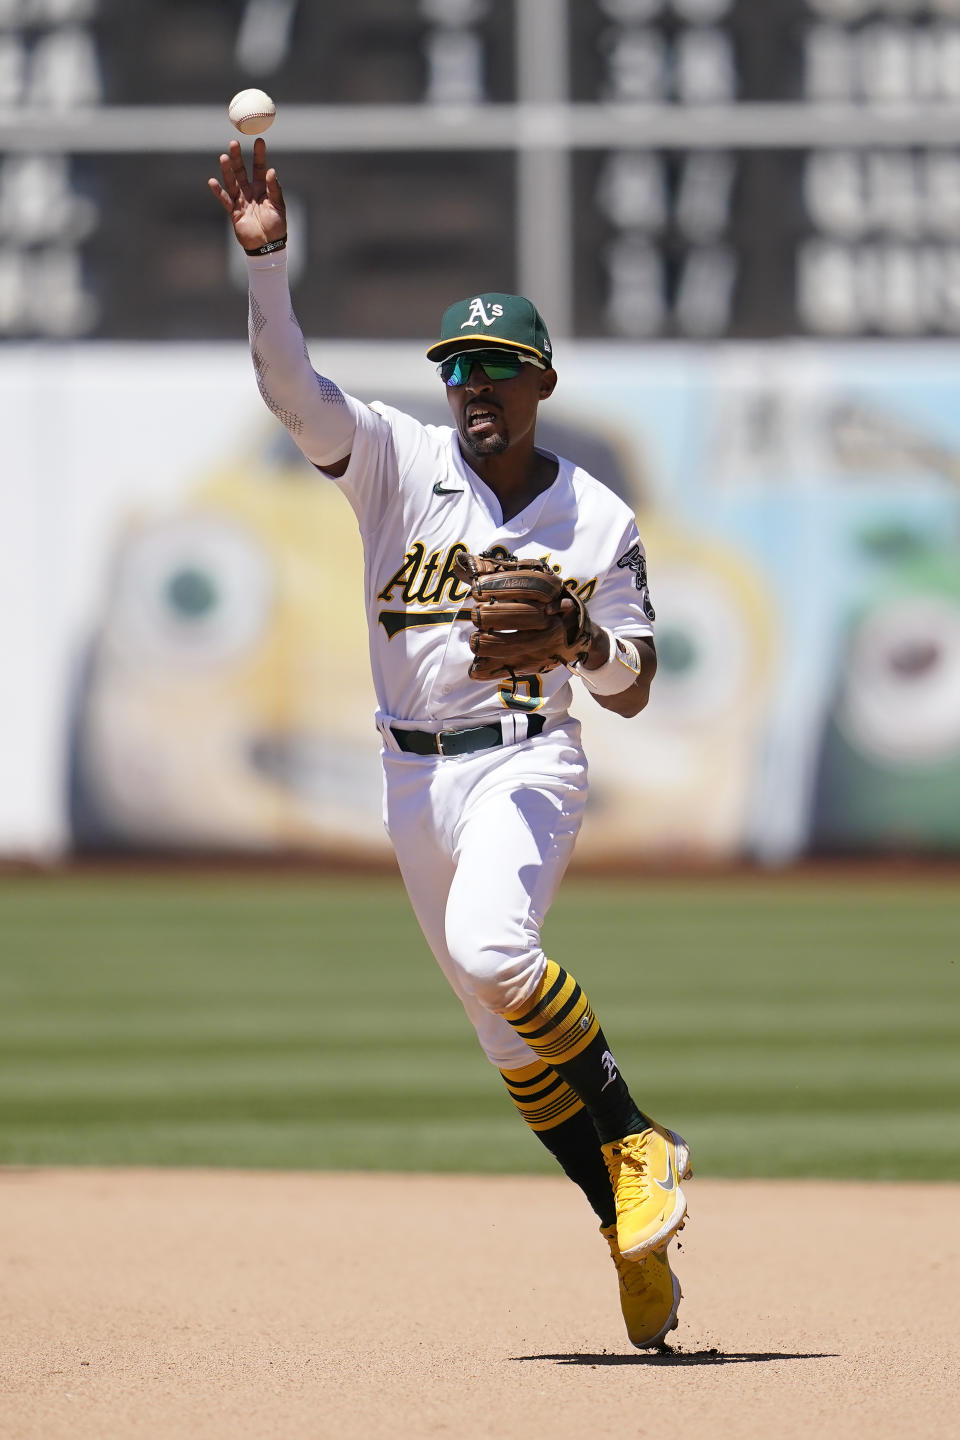 Oakland Athletics second baseman Tony Kemp throws out Houston Astros' Mauricio Dubon at first base during the seventh inning of a baseball game in Oakland, Calif., Wednesday, July 27, 2022. (AP Photo/Jeff Chiu)